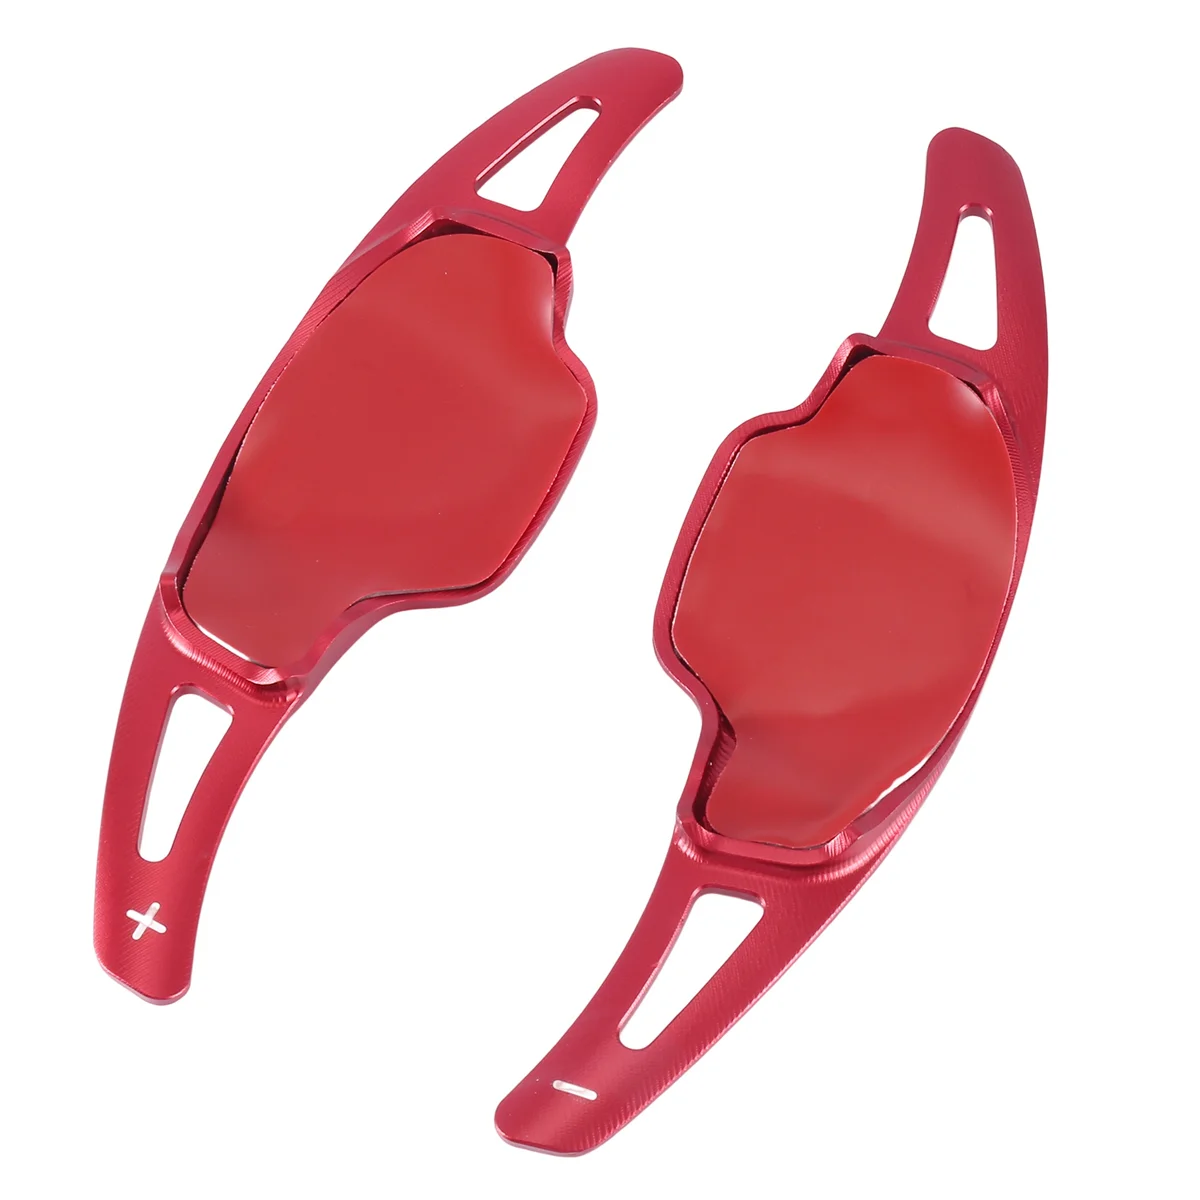 

2PCS/Pair Aluminum Steering Wheel Paddle Shifter Extension for Chevrolet Camaro 2017 2018 2019 Chevy C7 Corvette 2015-2019 (Red)